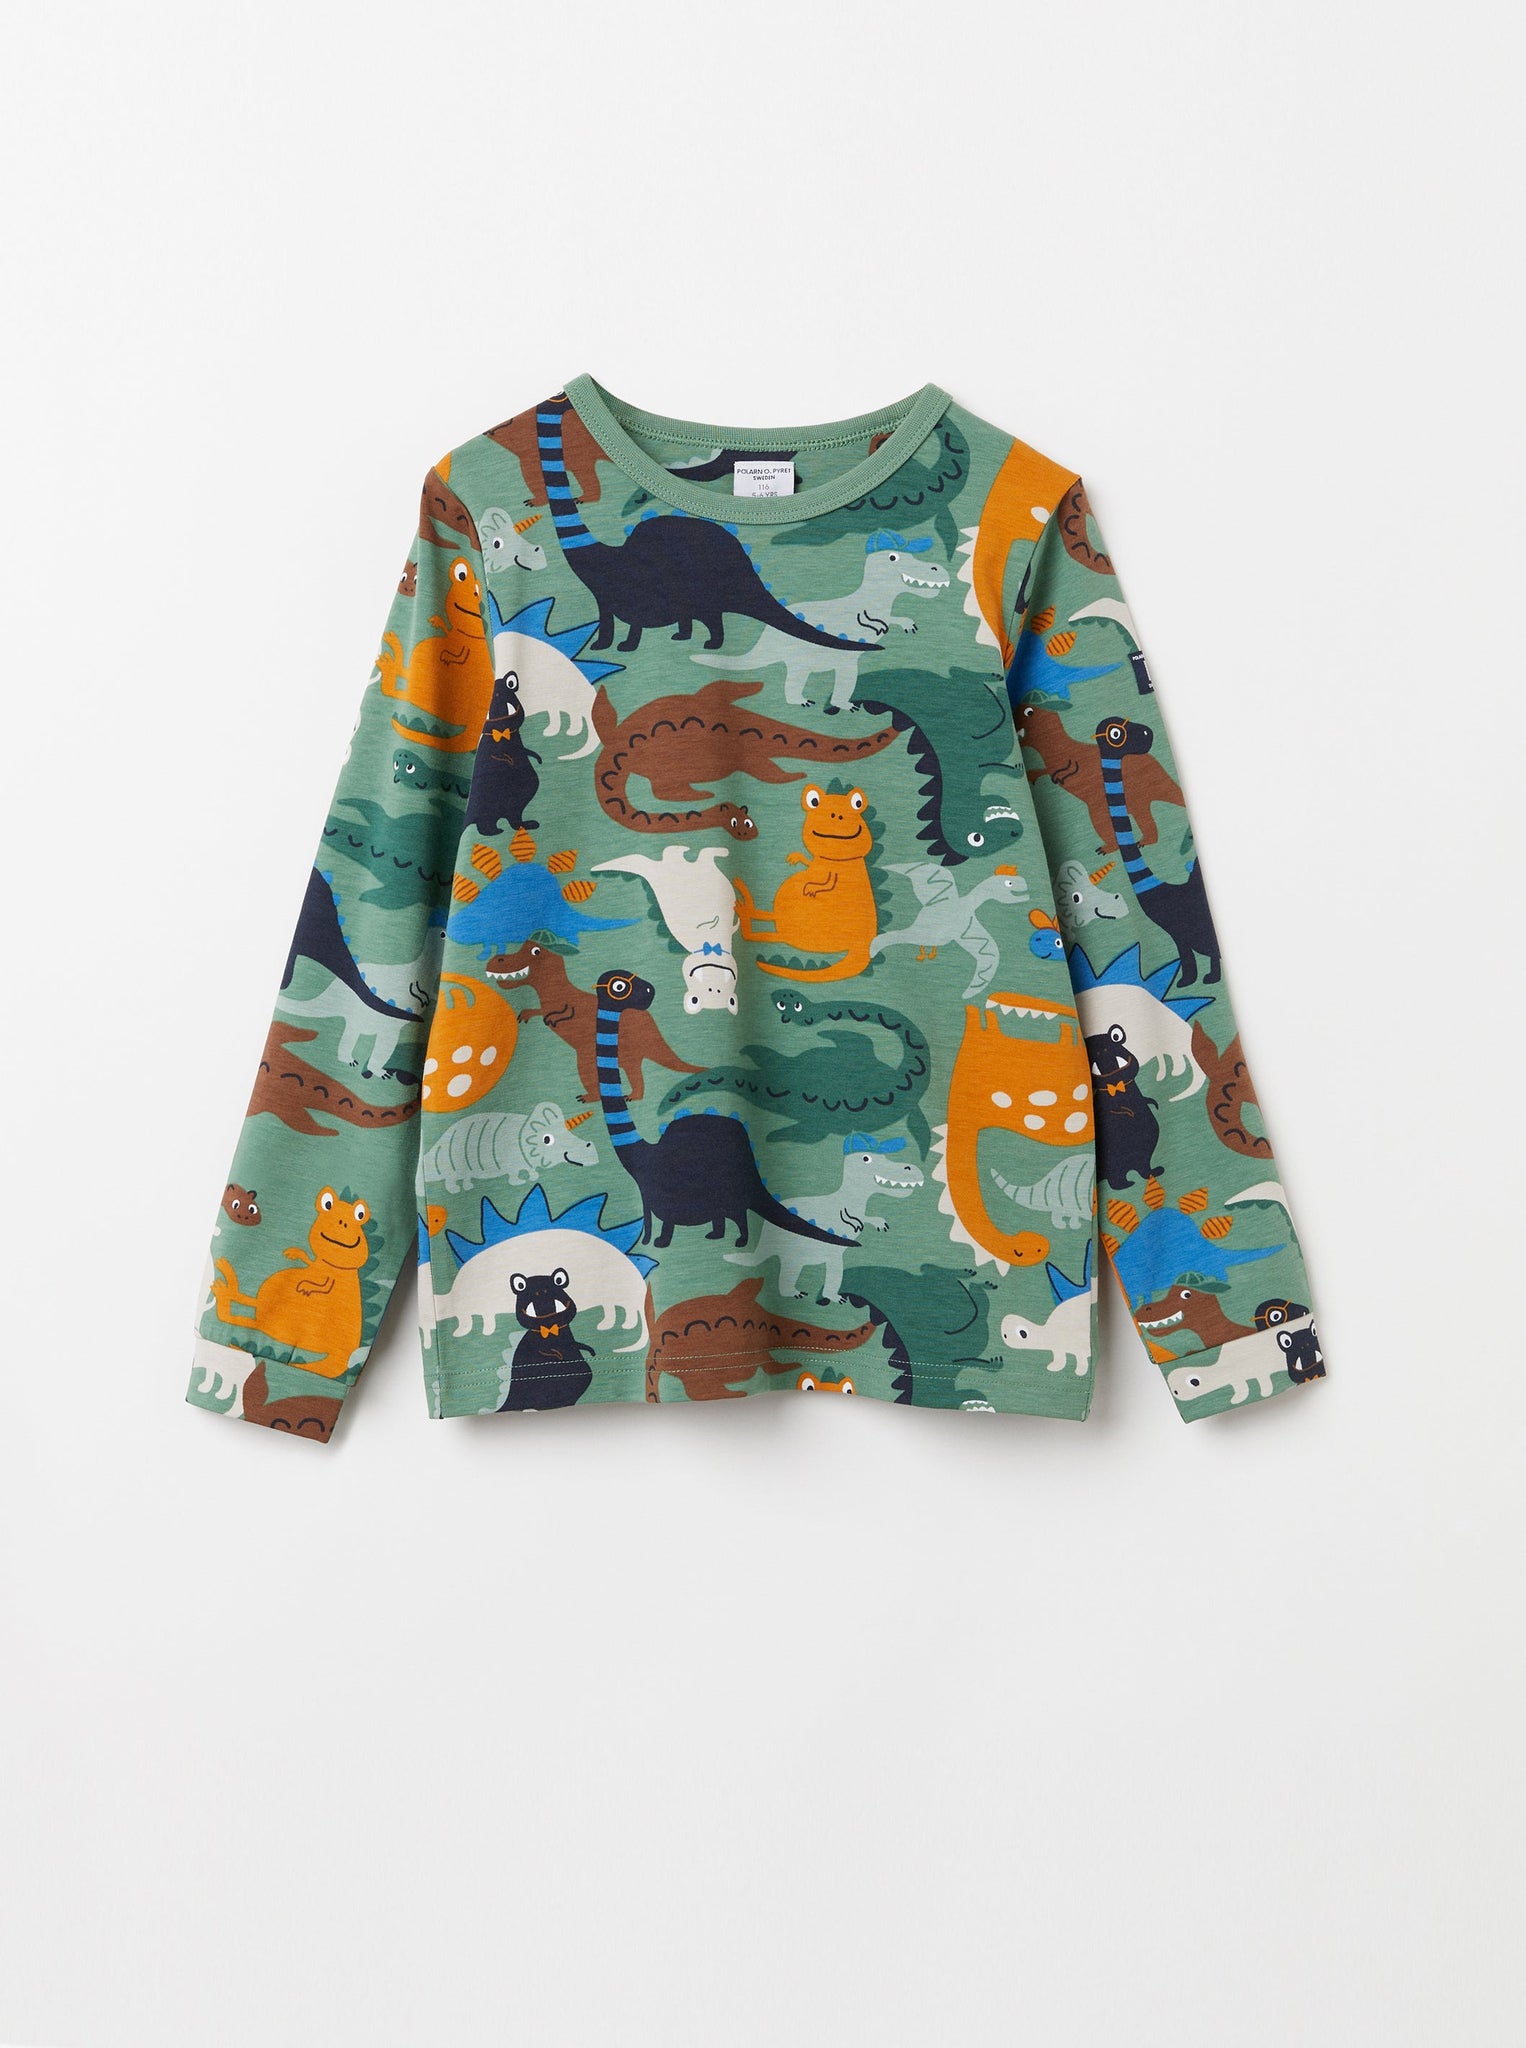 Green Dinosaur Kids Top from the Polarn O. Pyret Kidswear collection. Clothes made using sustainably sourced materials.